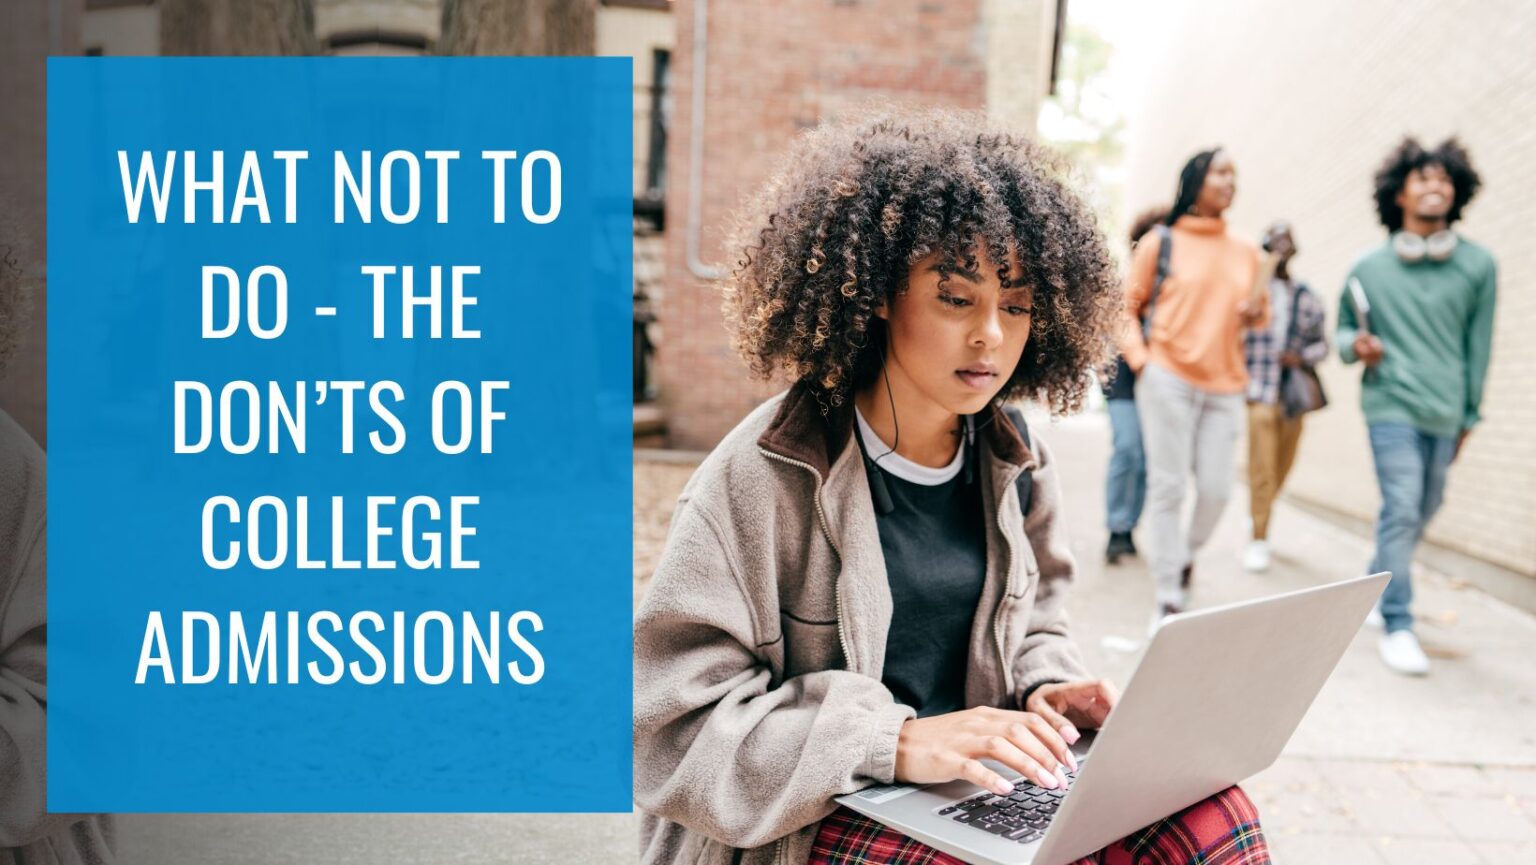 The Don'ts of College Admissions - What not to do